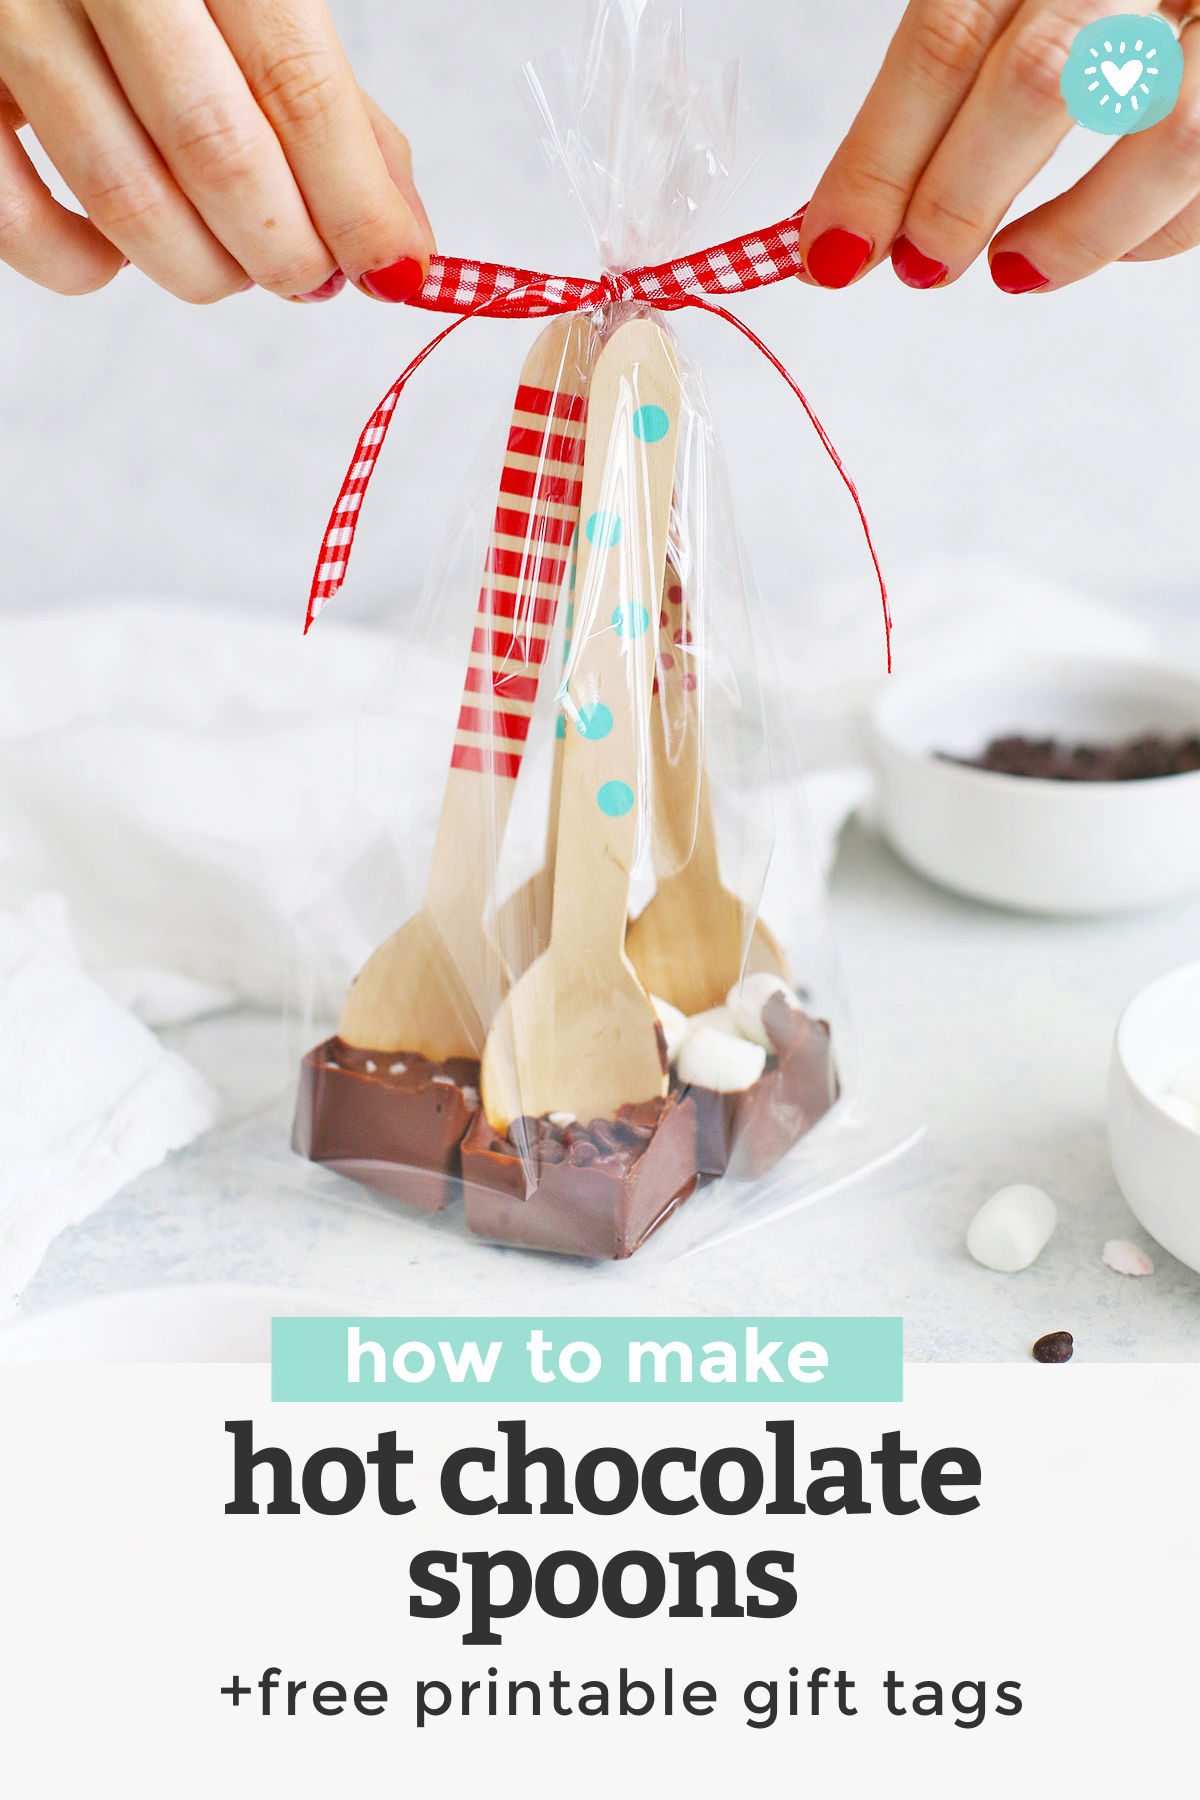 Hot Chocolate Spoons + FREE PRINTABLE GIFT TAGS! These chocolate-coated spoons are perfect for making homemade hot chocolate. They make a fun winter project or easy DIY holiday gift for friends and neighbors! (Gluten-free, dairy-free, paleo & vegan-friendly!) #hotchocolate #diygift #ediblegift #holidaygift #hotcocoa #hotchocolatespoon #vegan #allergyfriendly #paleo #freeprintable #printablegifttag